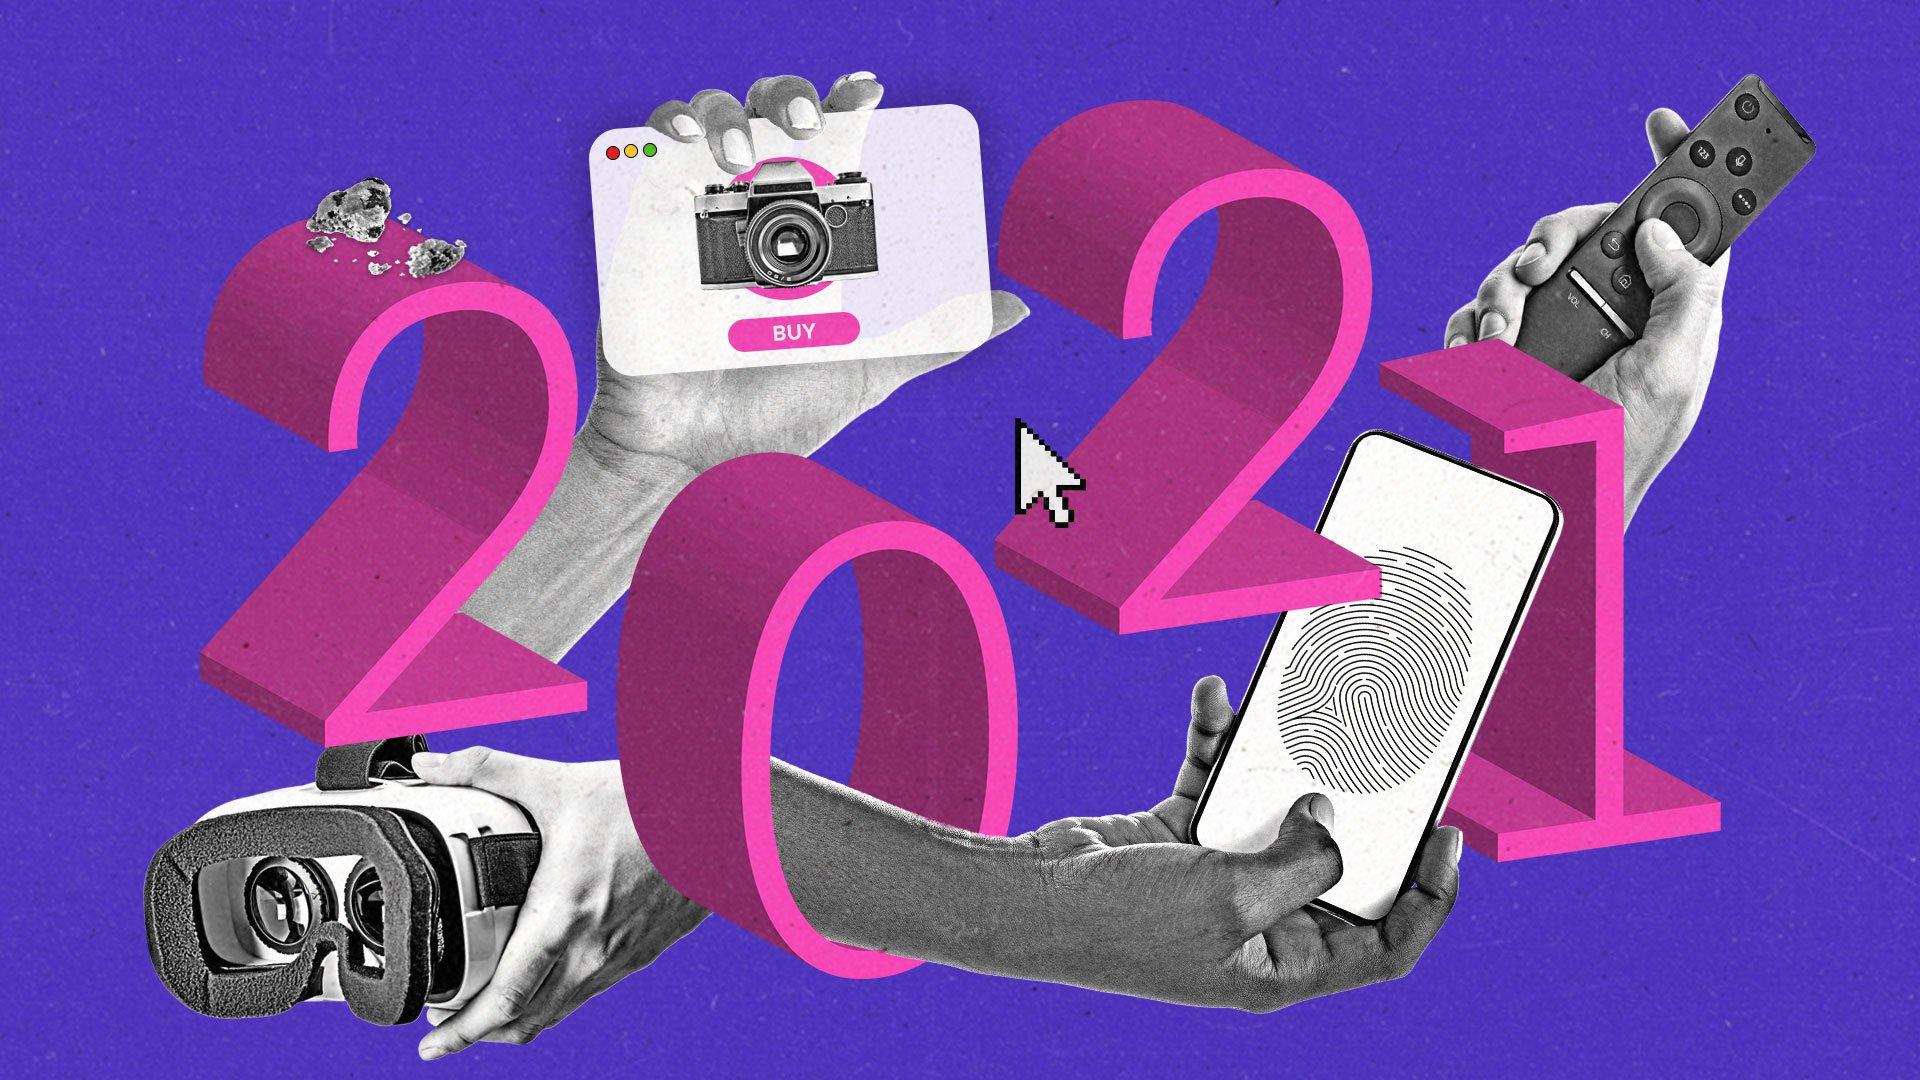 The most-read stories of 2021